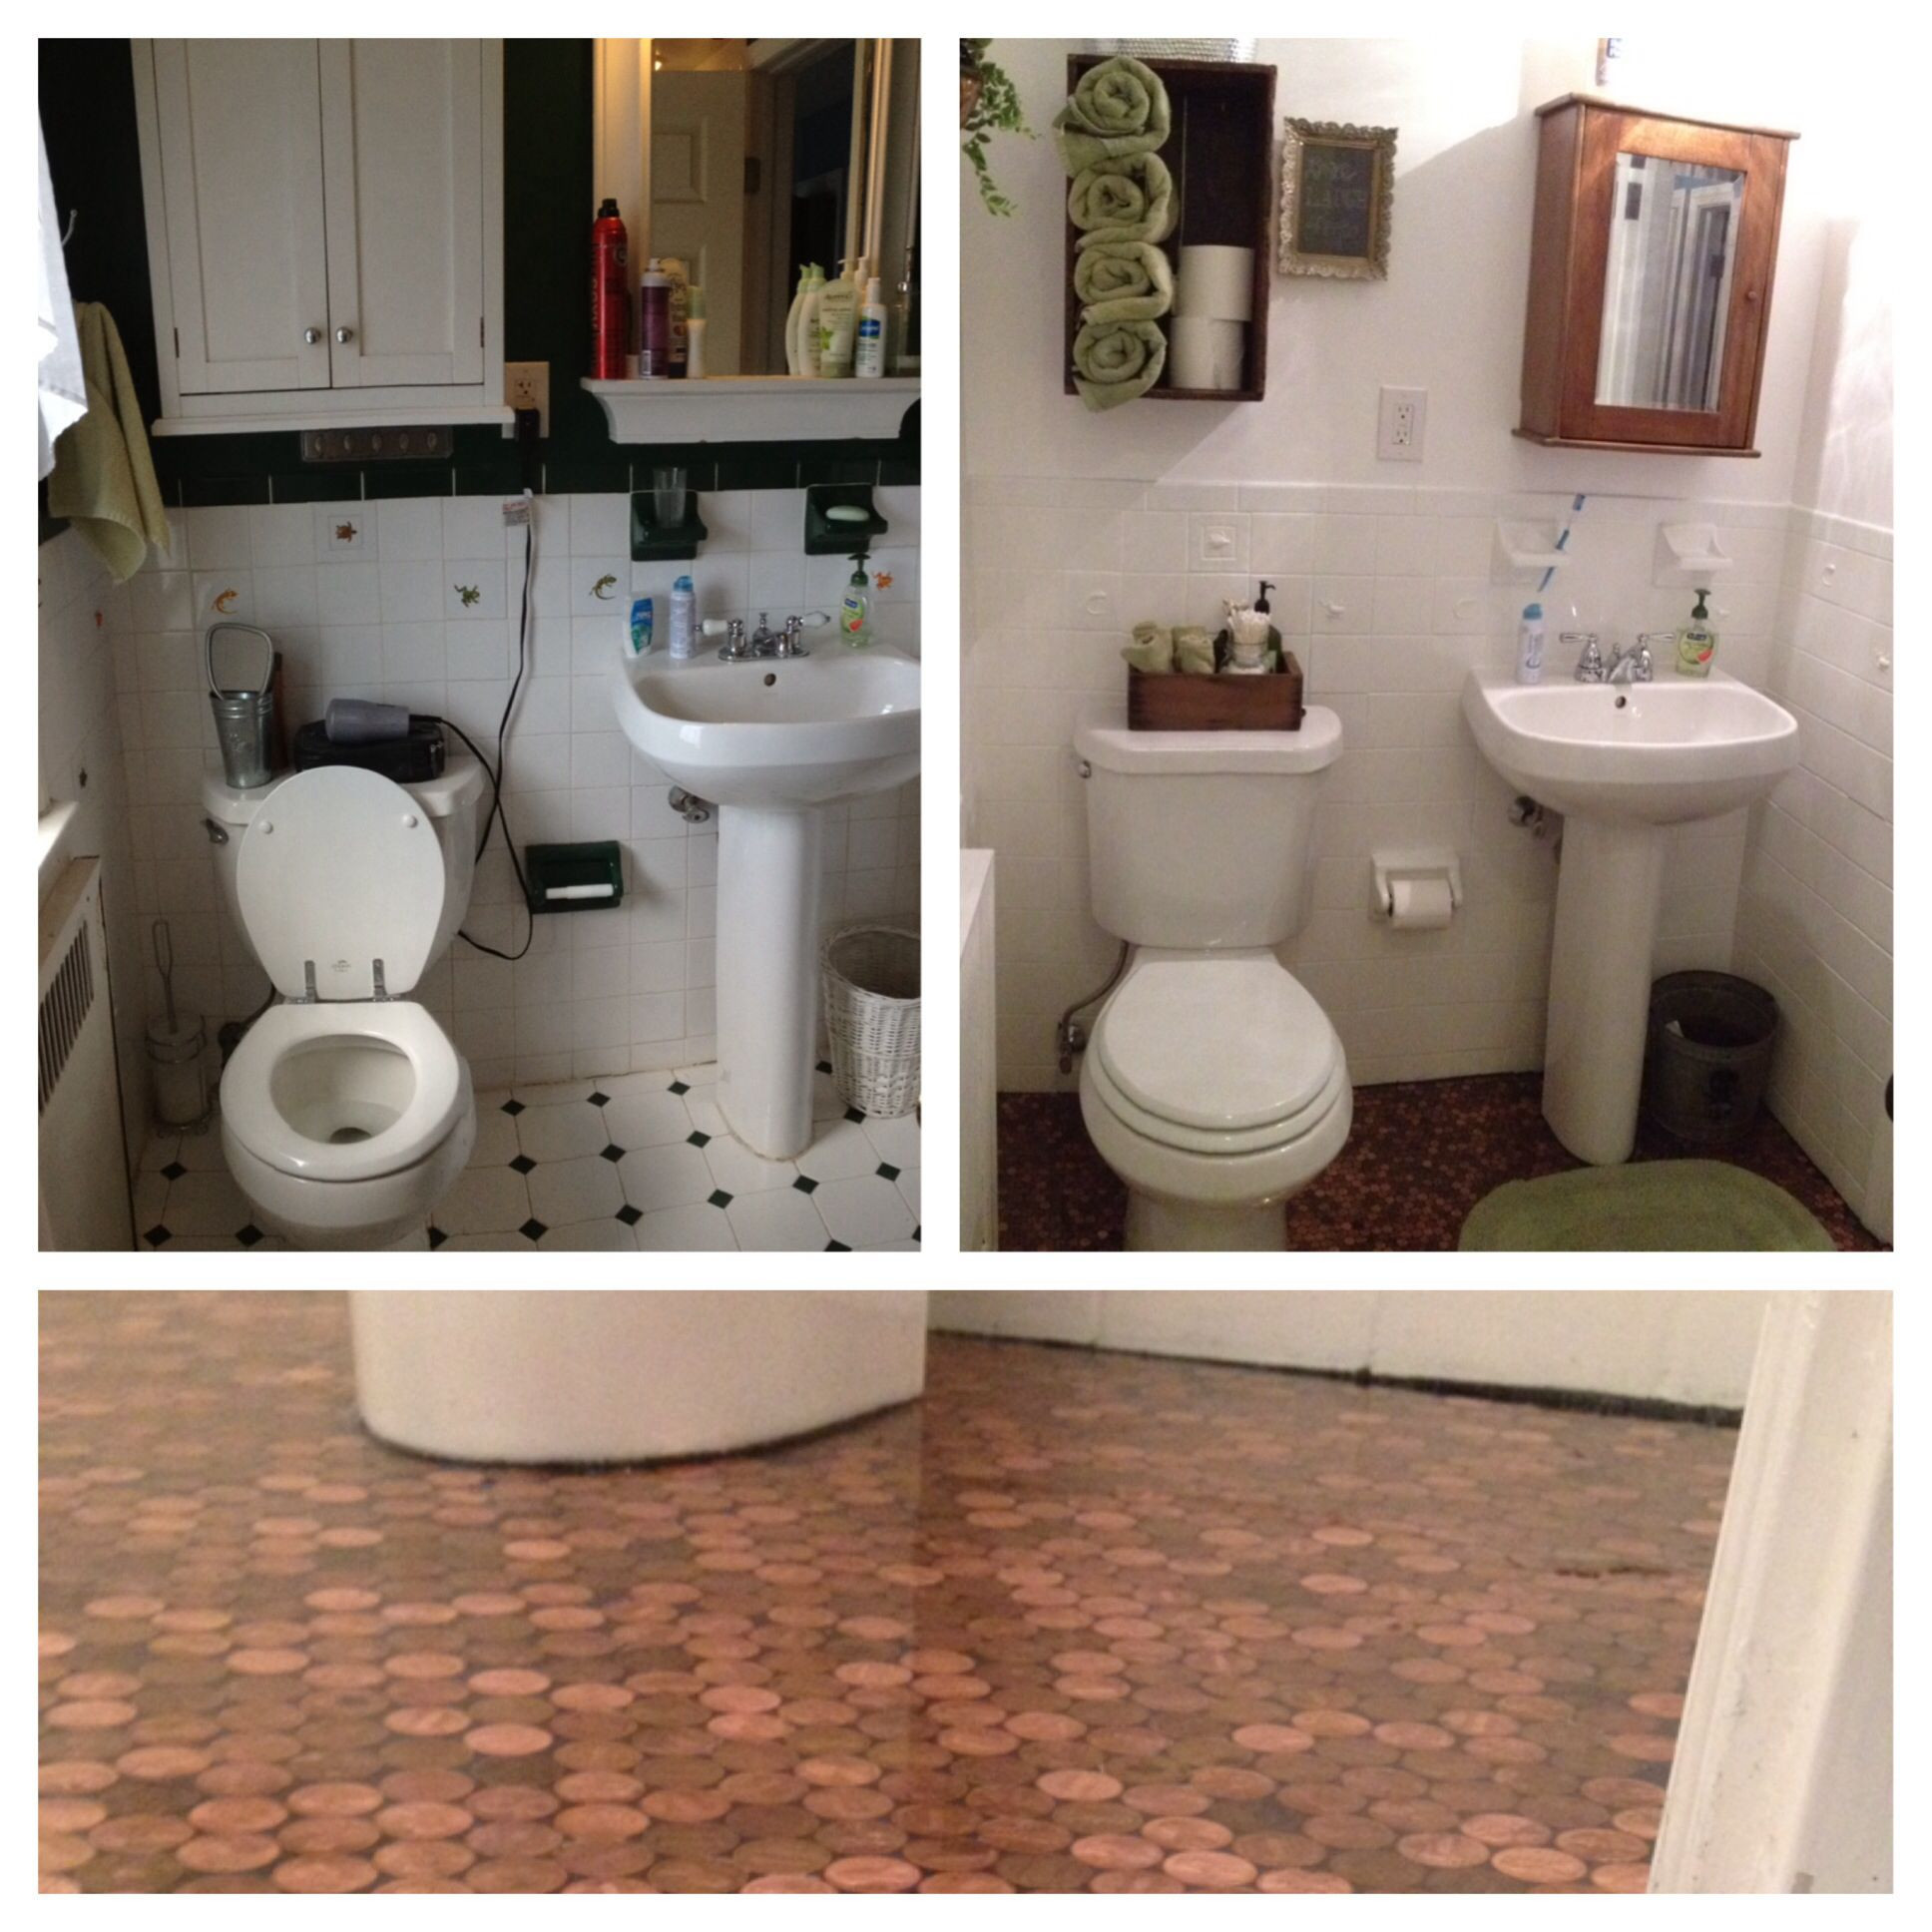 Epoxy Paint Bathroom Tile
 Bathroom Makeover with a Penny Floor & Epoxy paint over